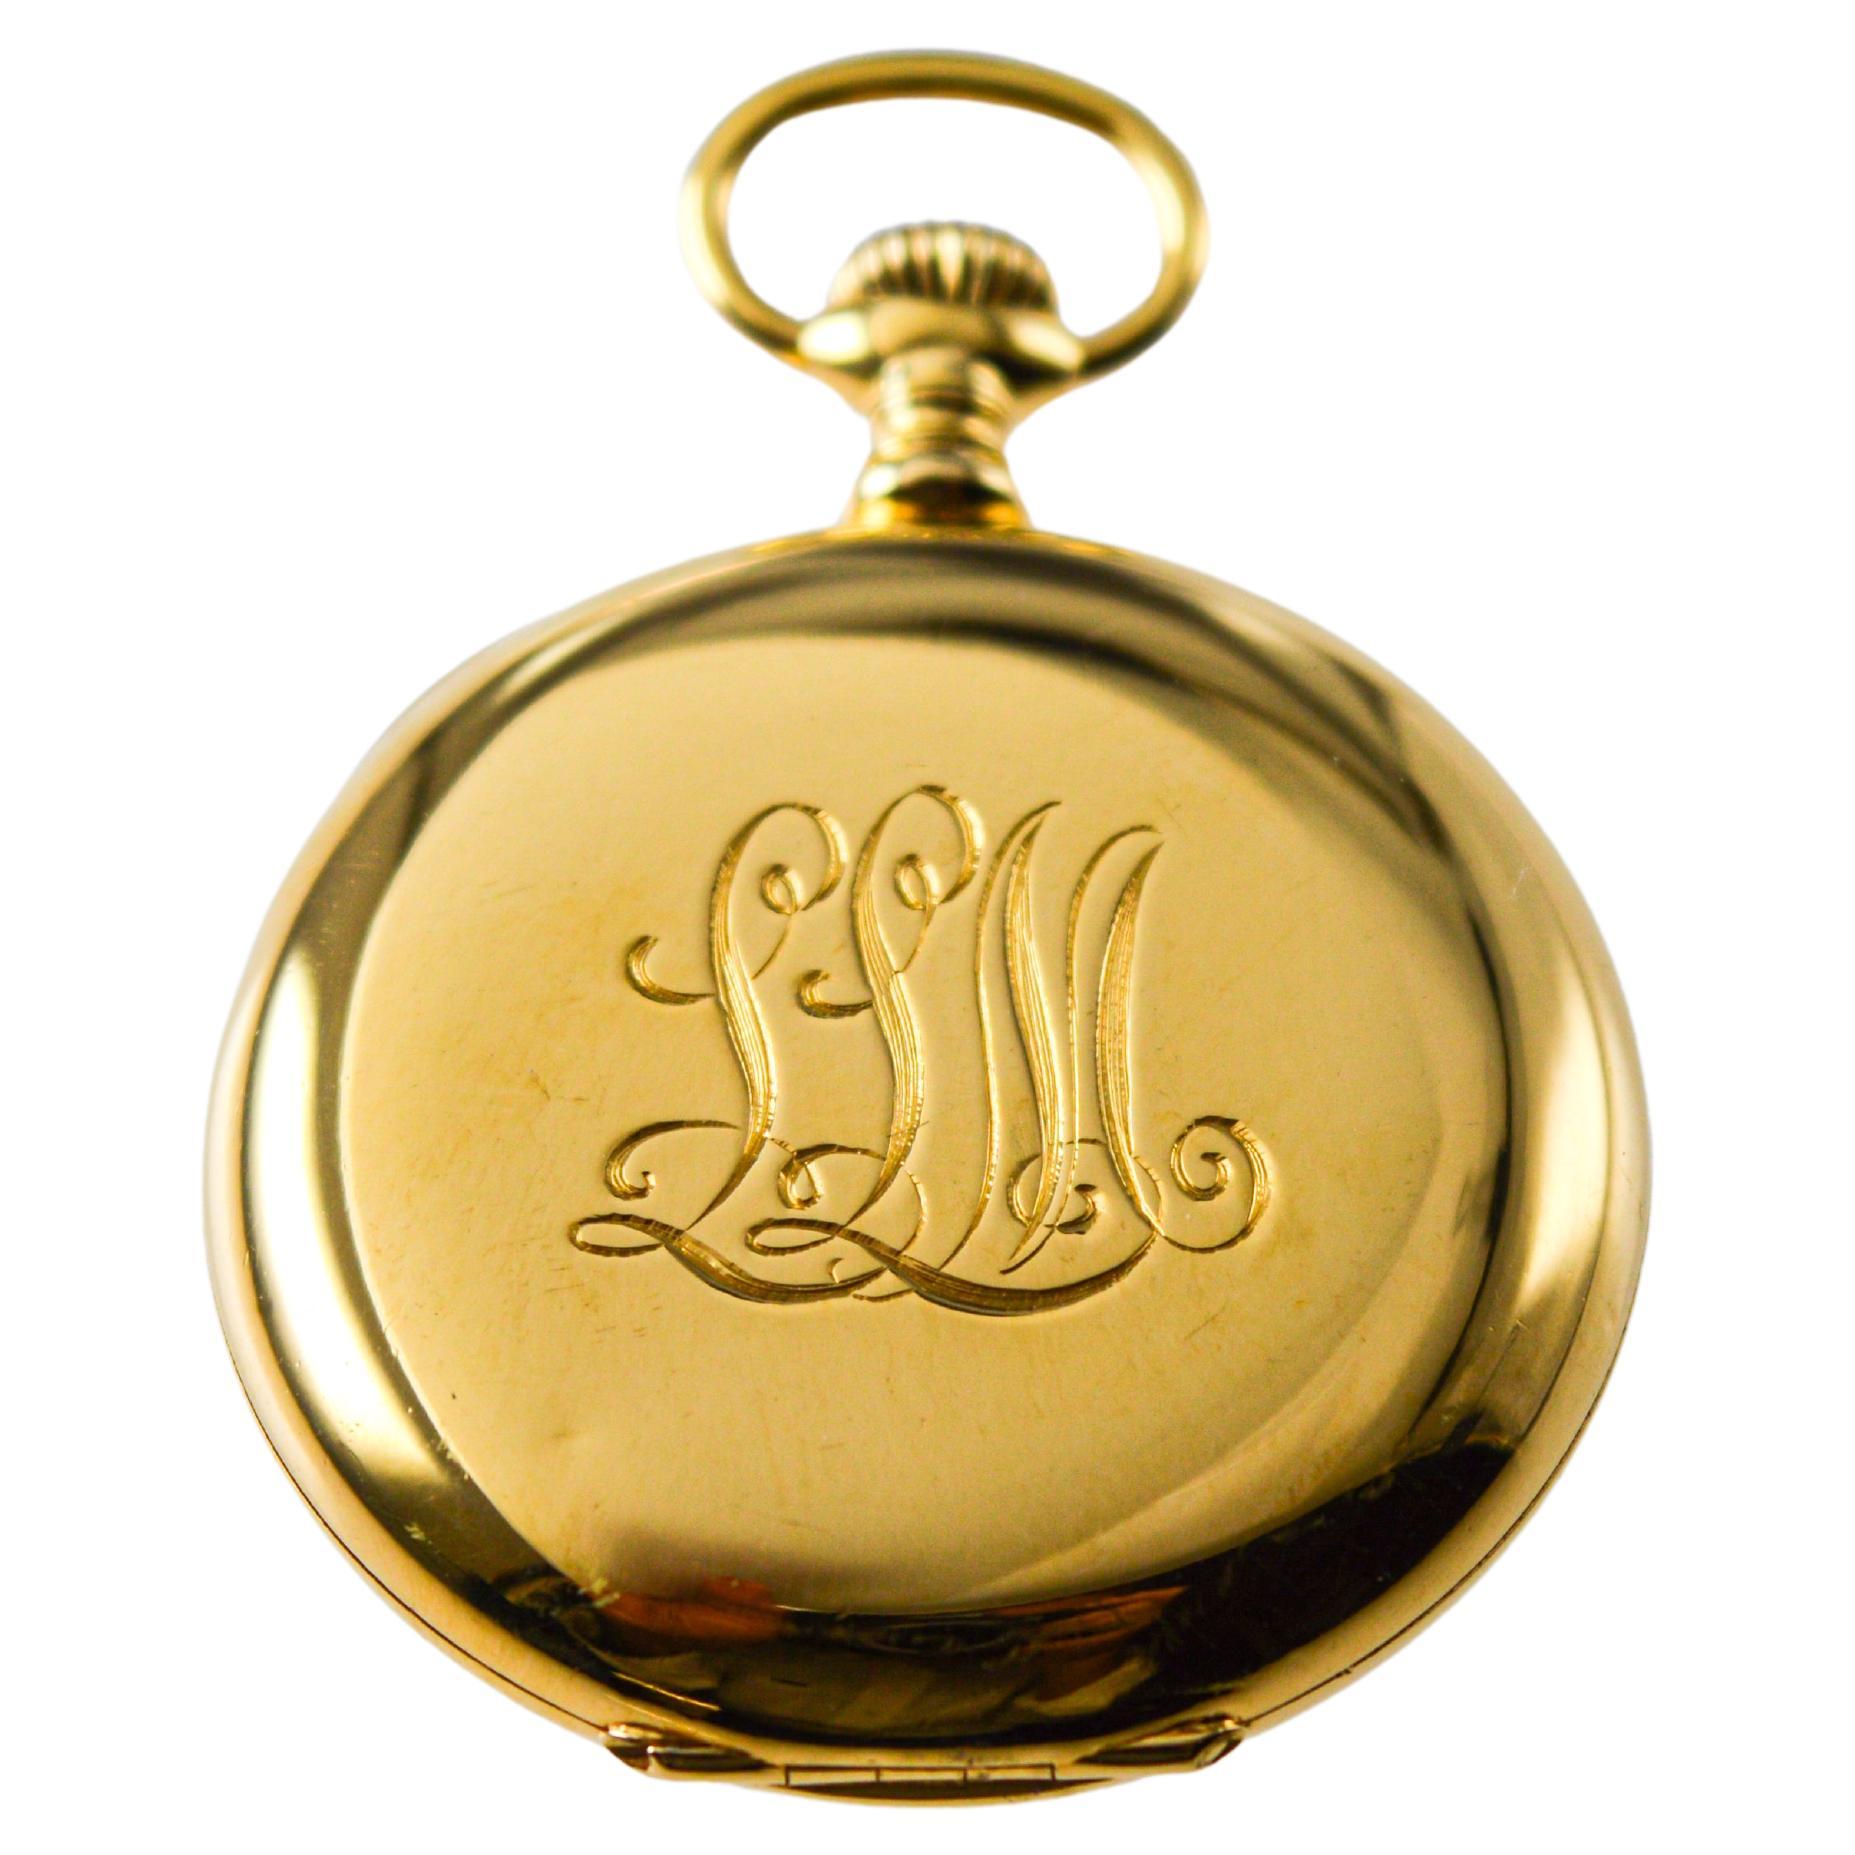 Tiffany & Co 18Kt Gold Pendant Watch with Gold Chain from 1912 Enamel Dial For Sale 6